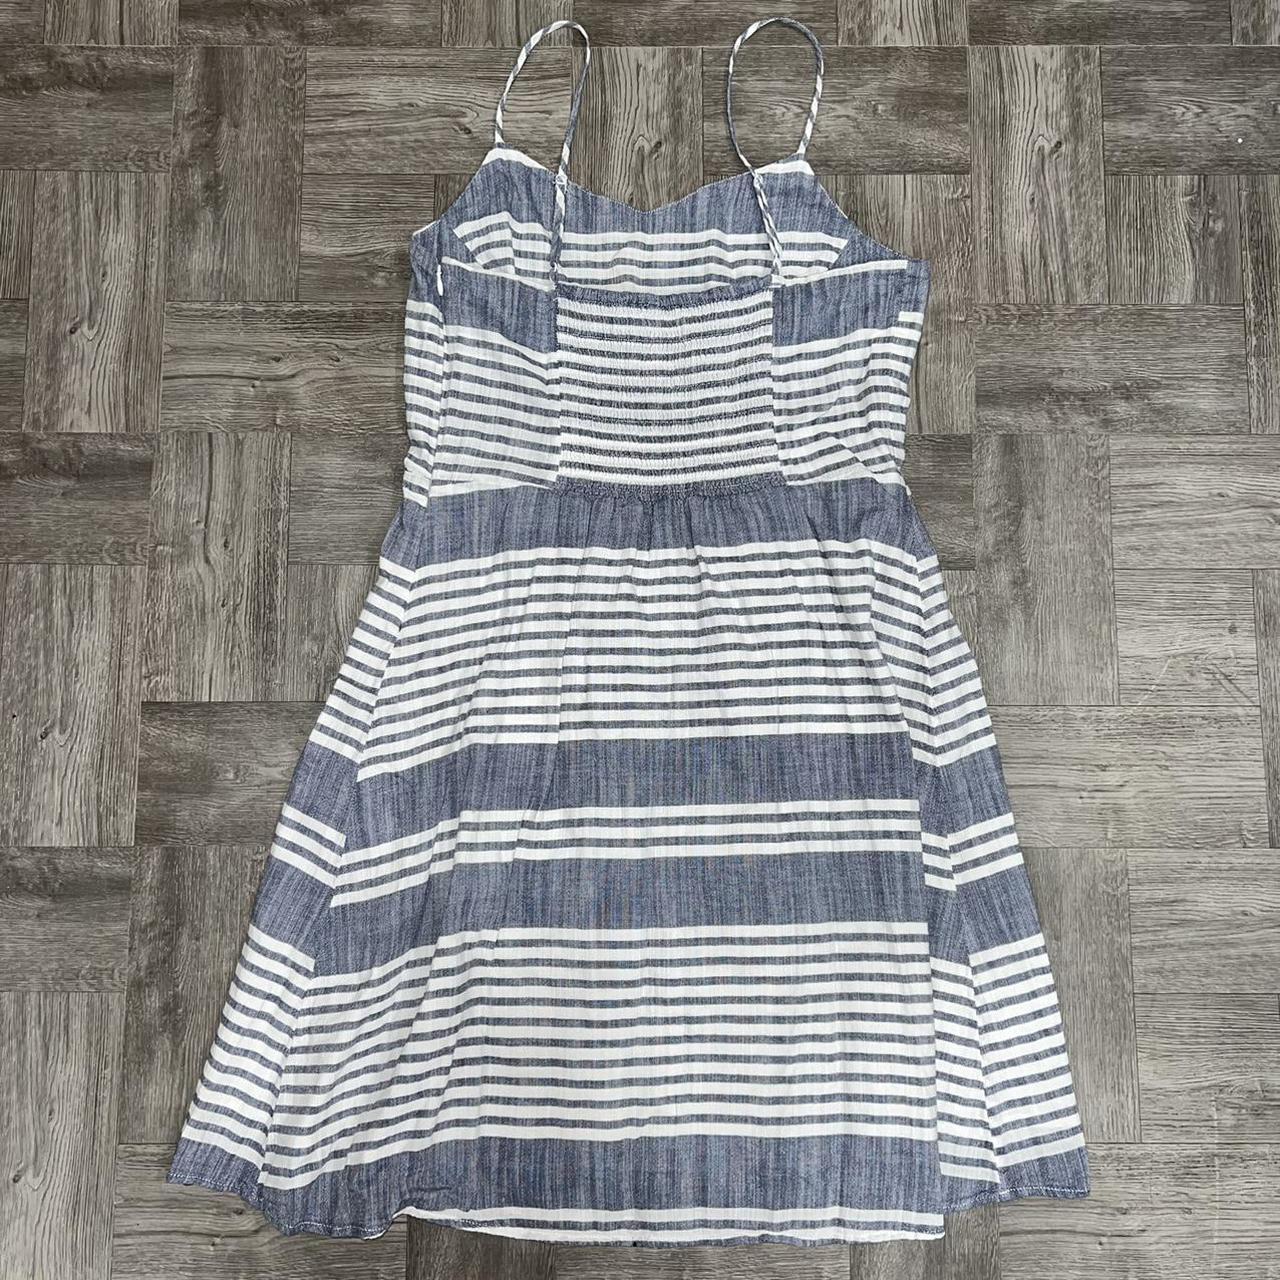 Product Image 2 - NWOT Old Navy blue and